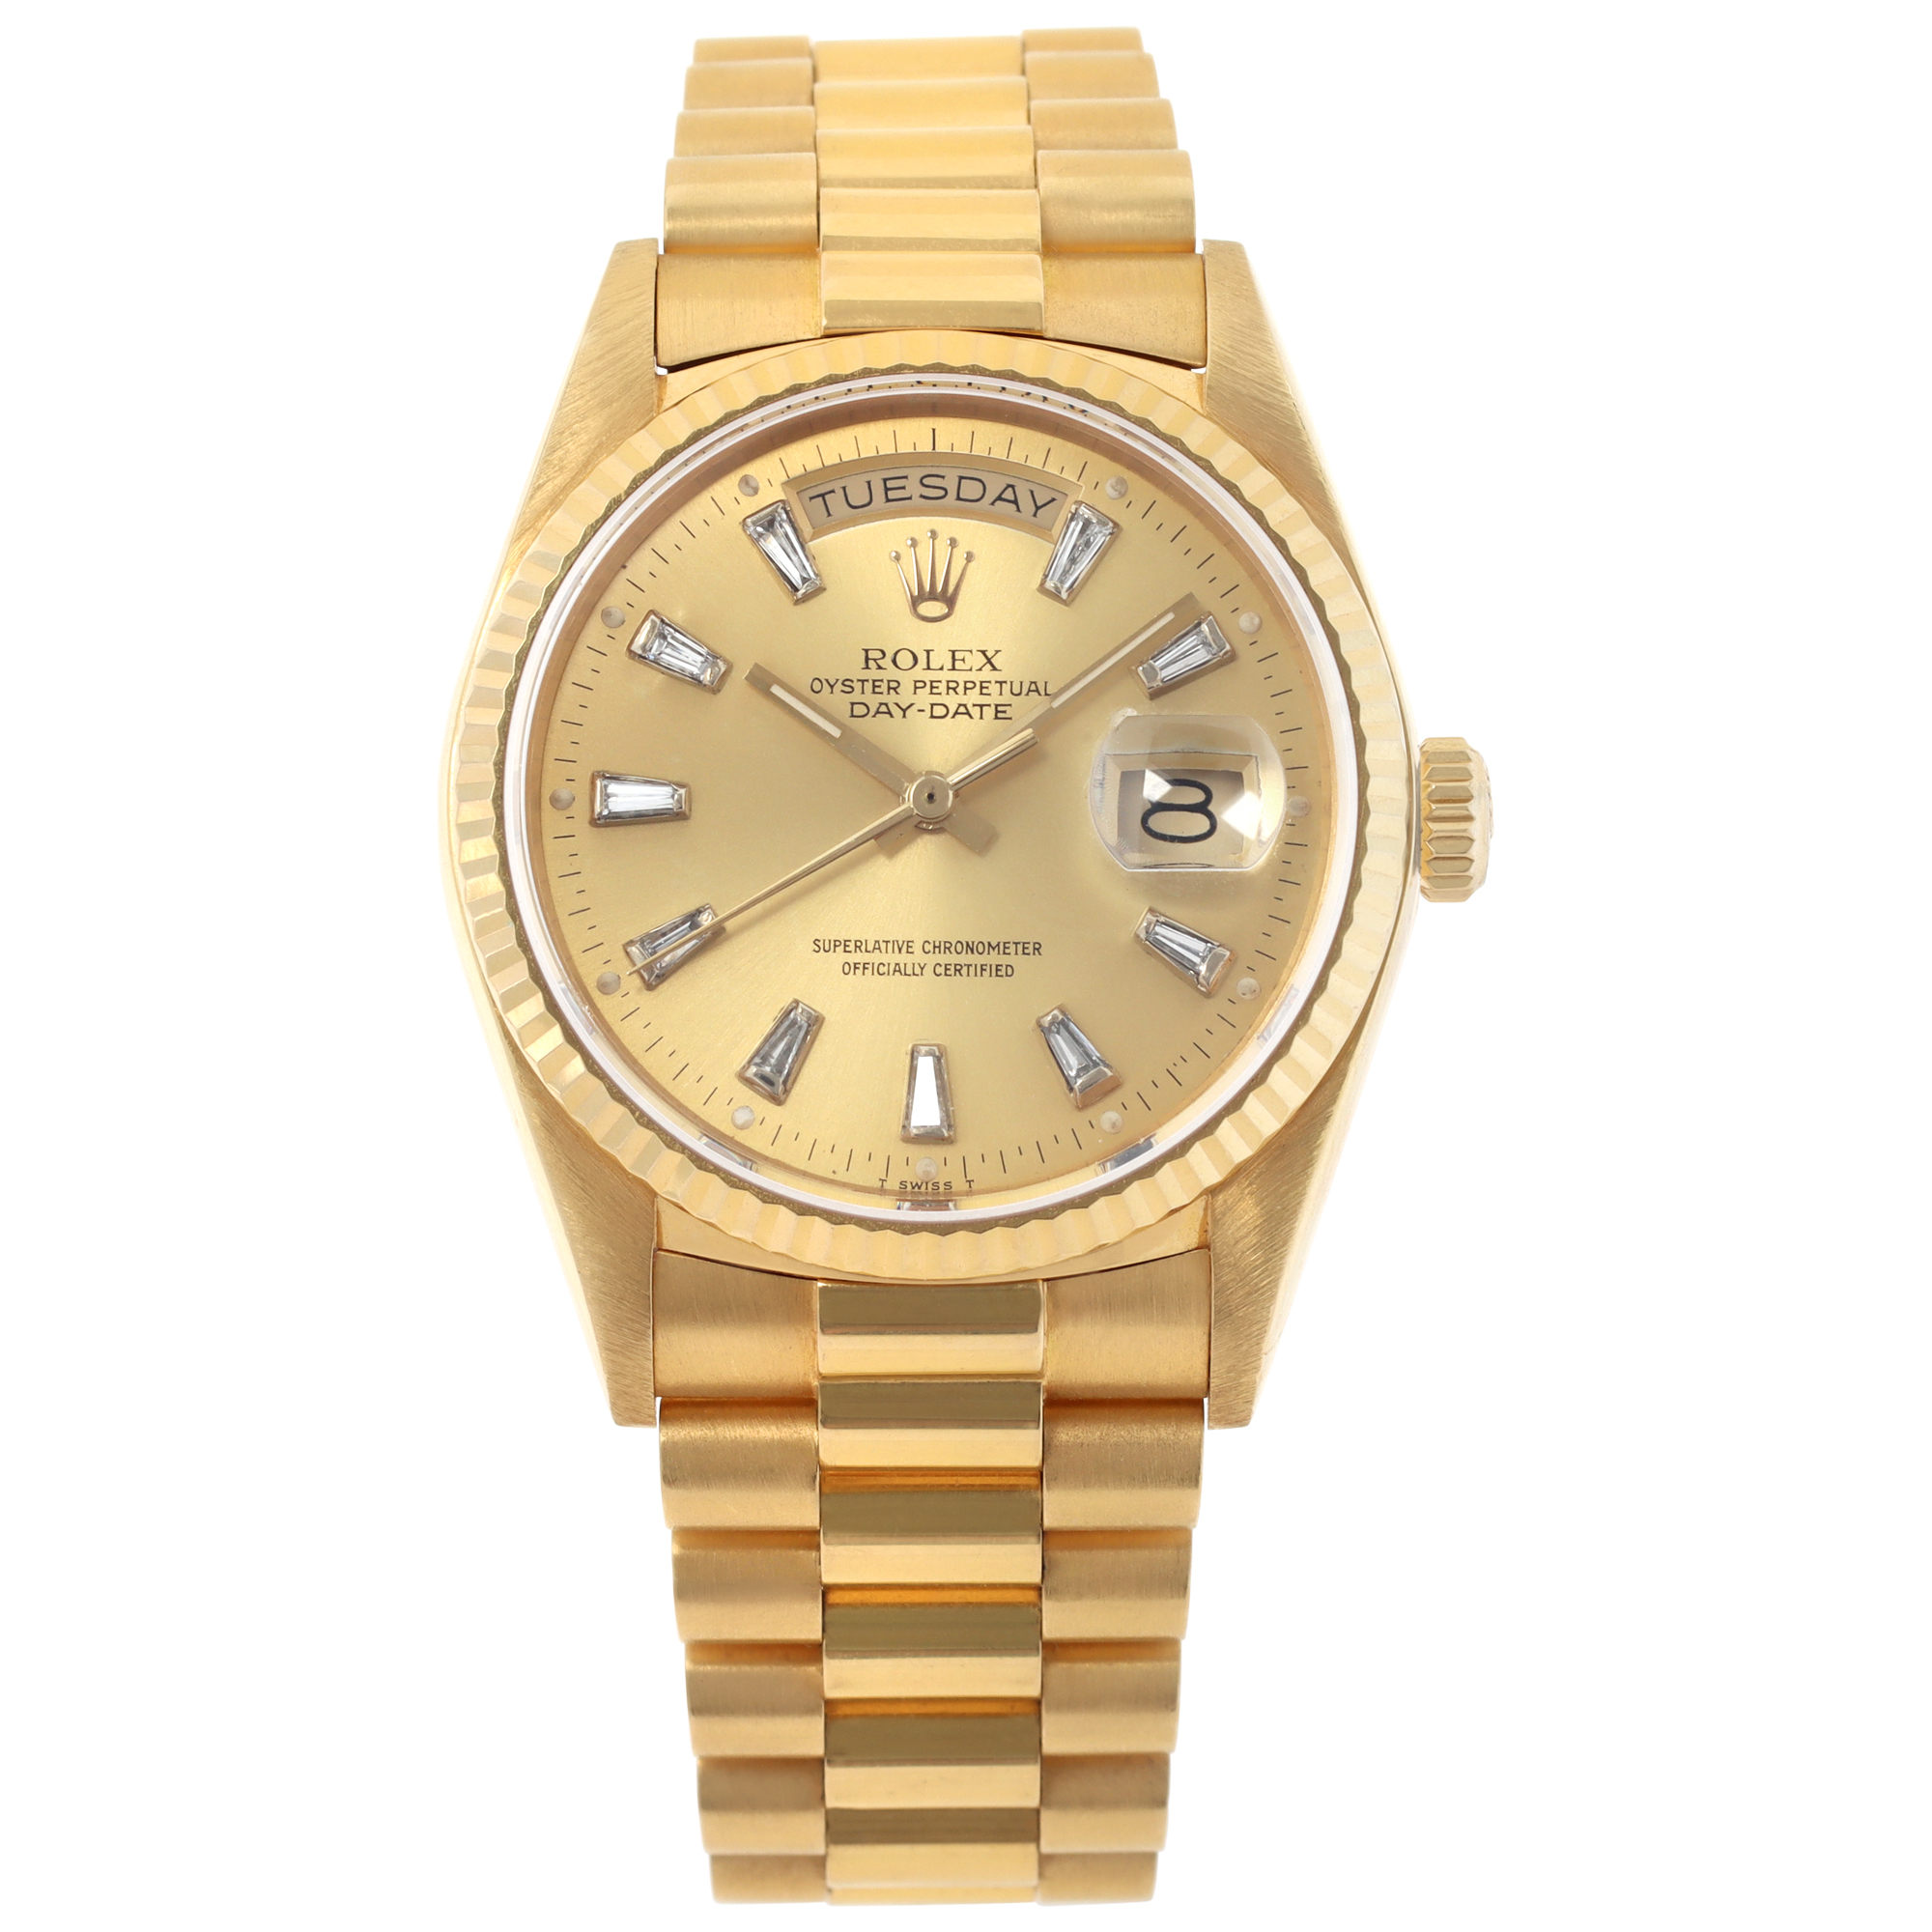 Rolex Day-Date 36mm 18038 (Watches)